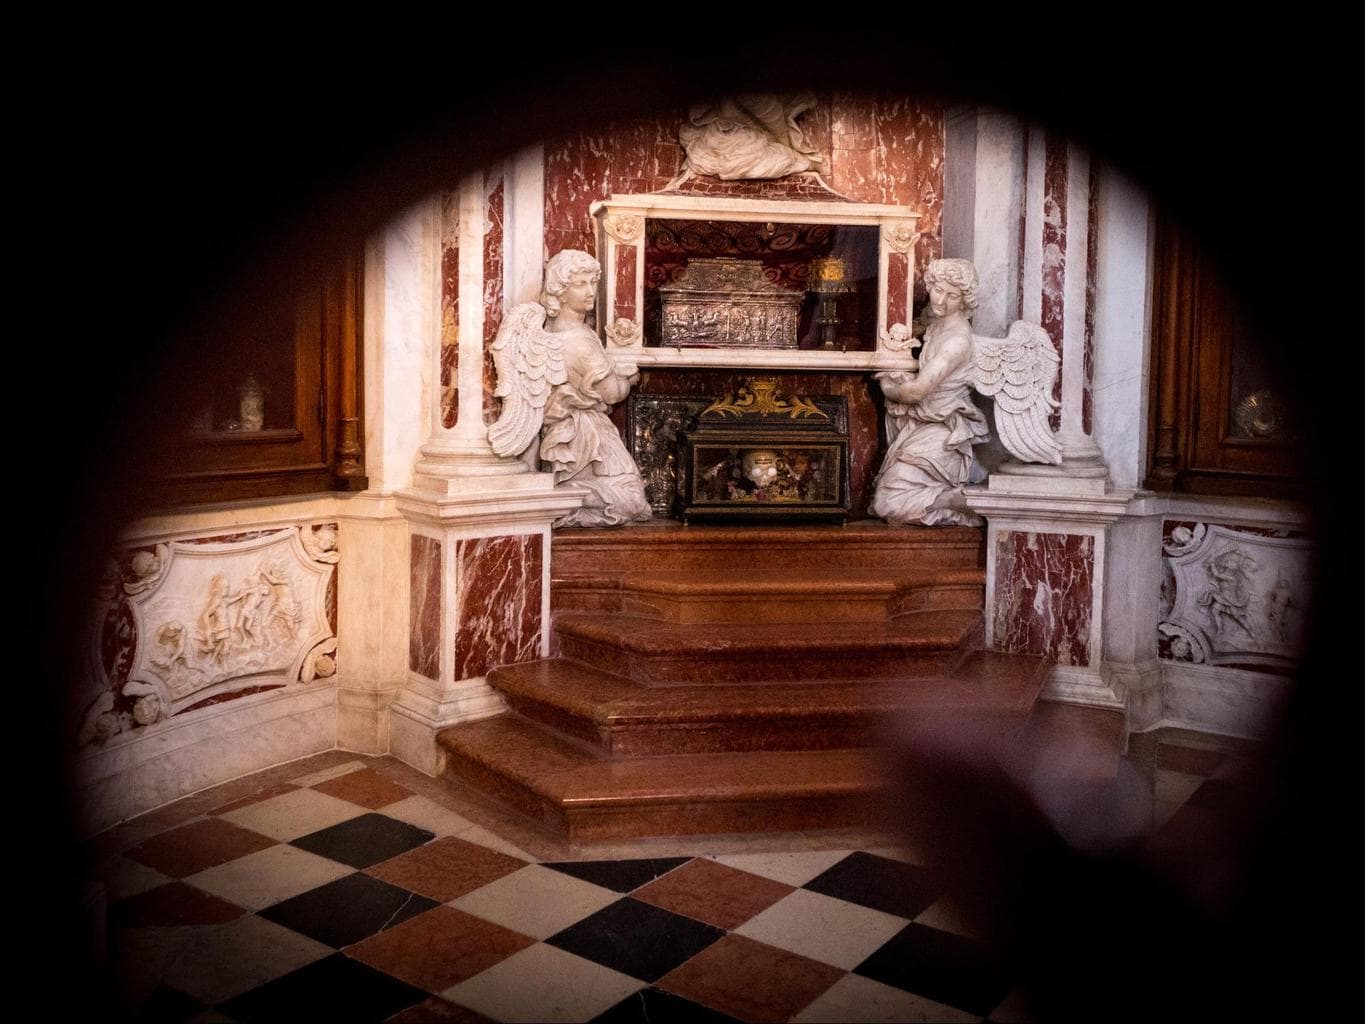 The relics of St. Tryphon